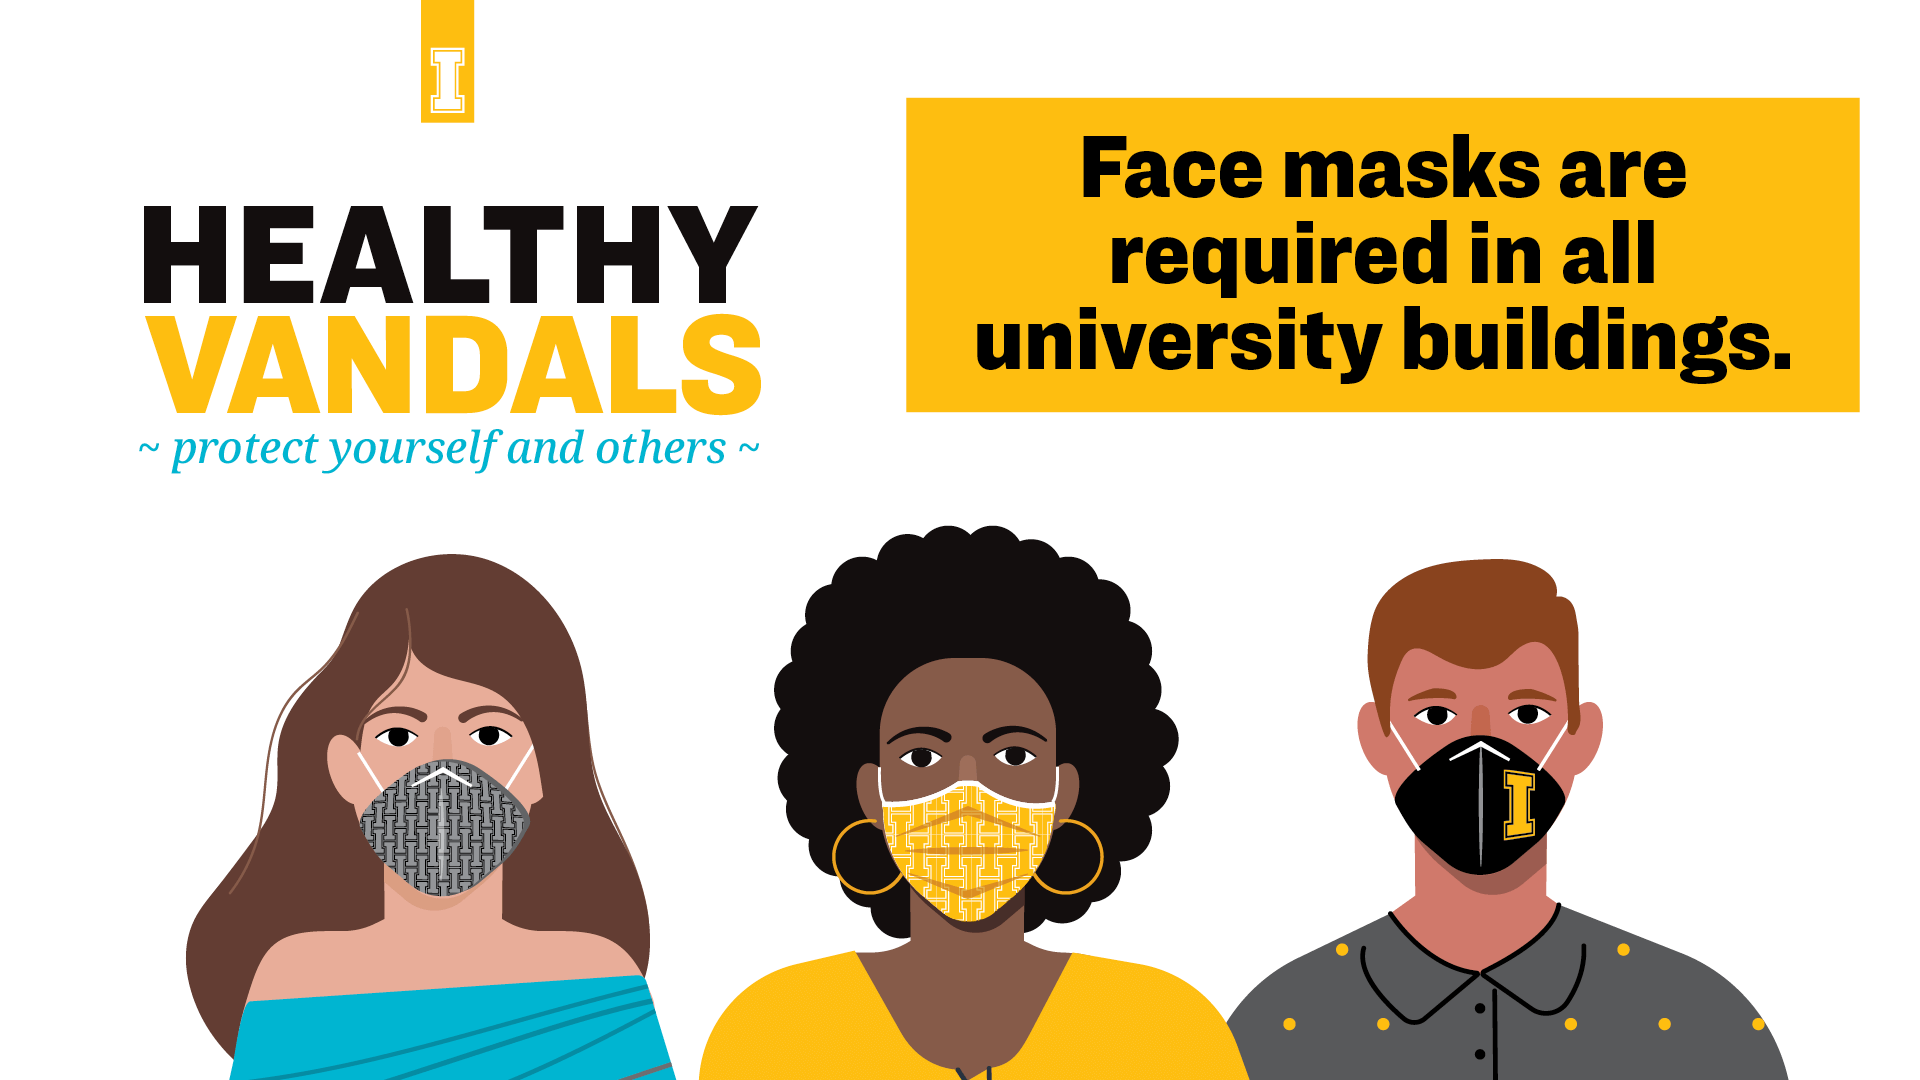 "Face masks are required in all university buildings."